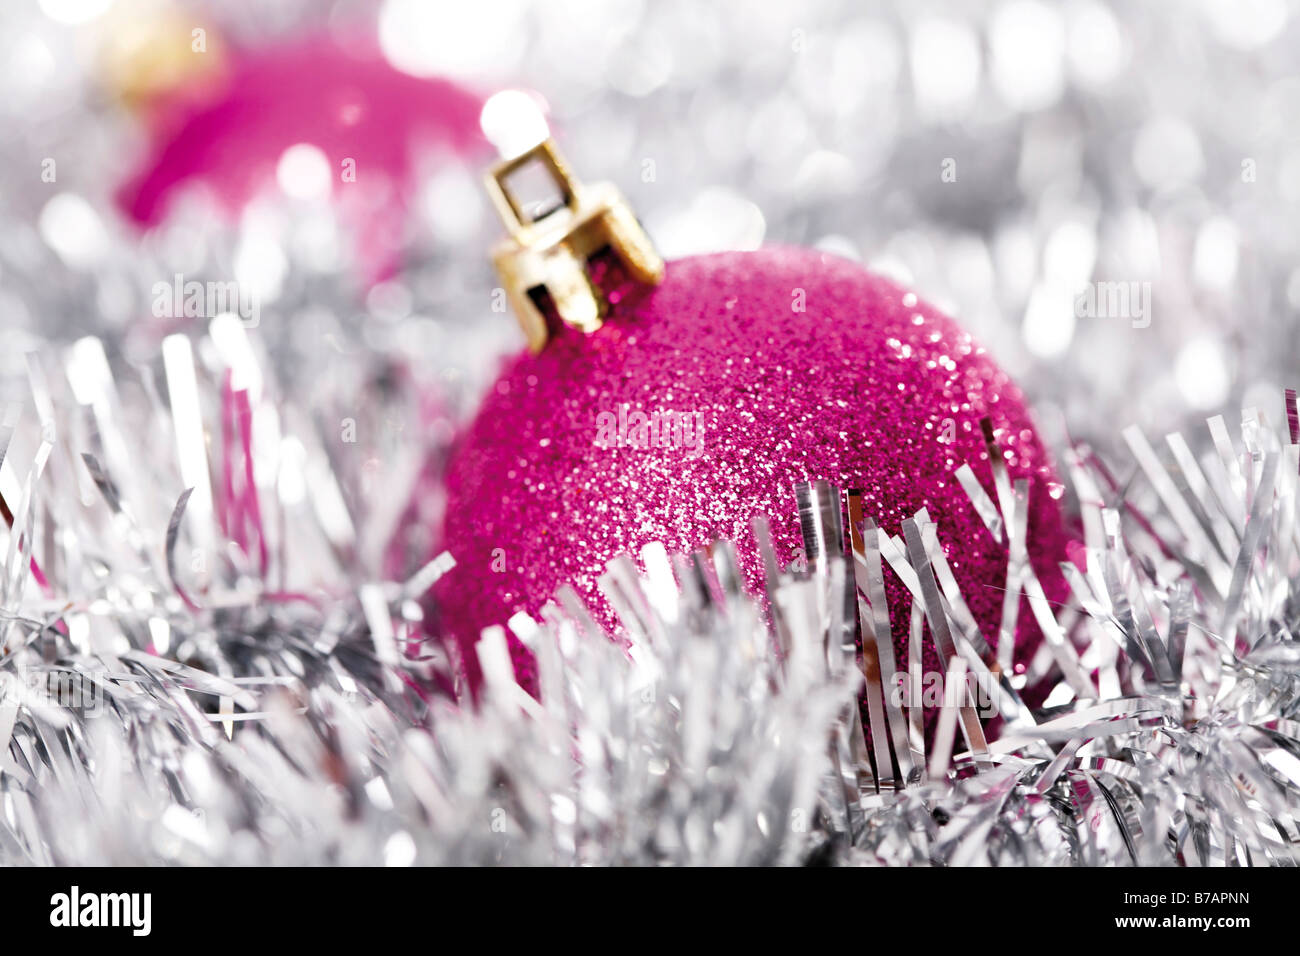 Pink glitter Christmas tree balls with Christmas decorations Stock Photo